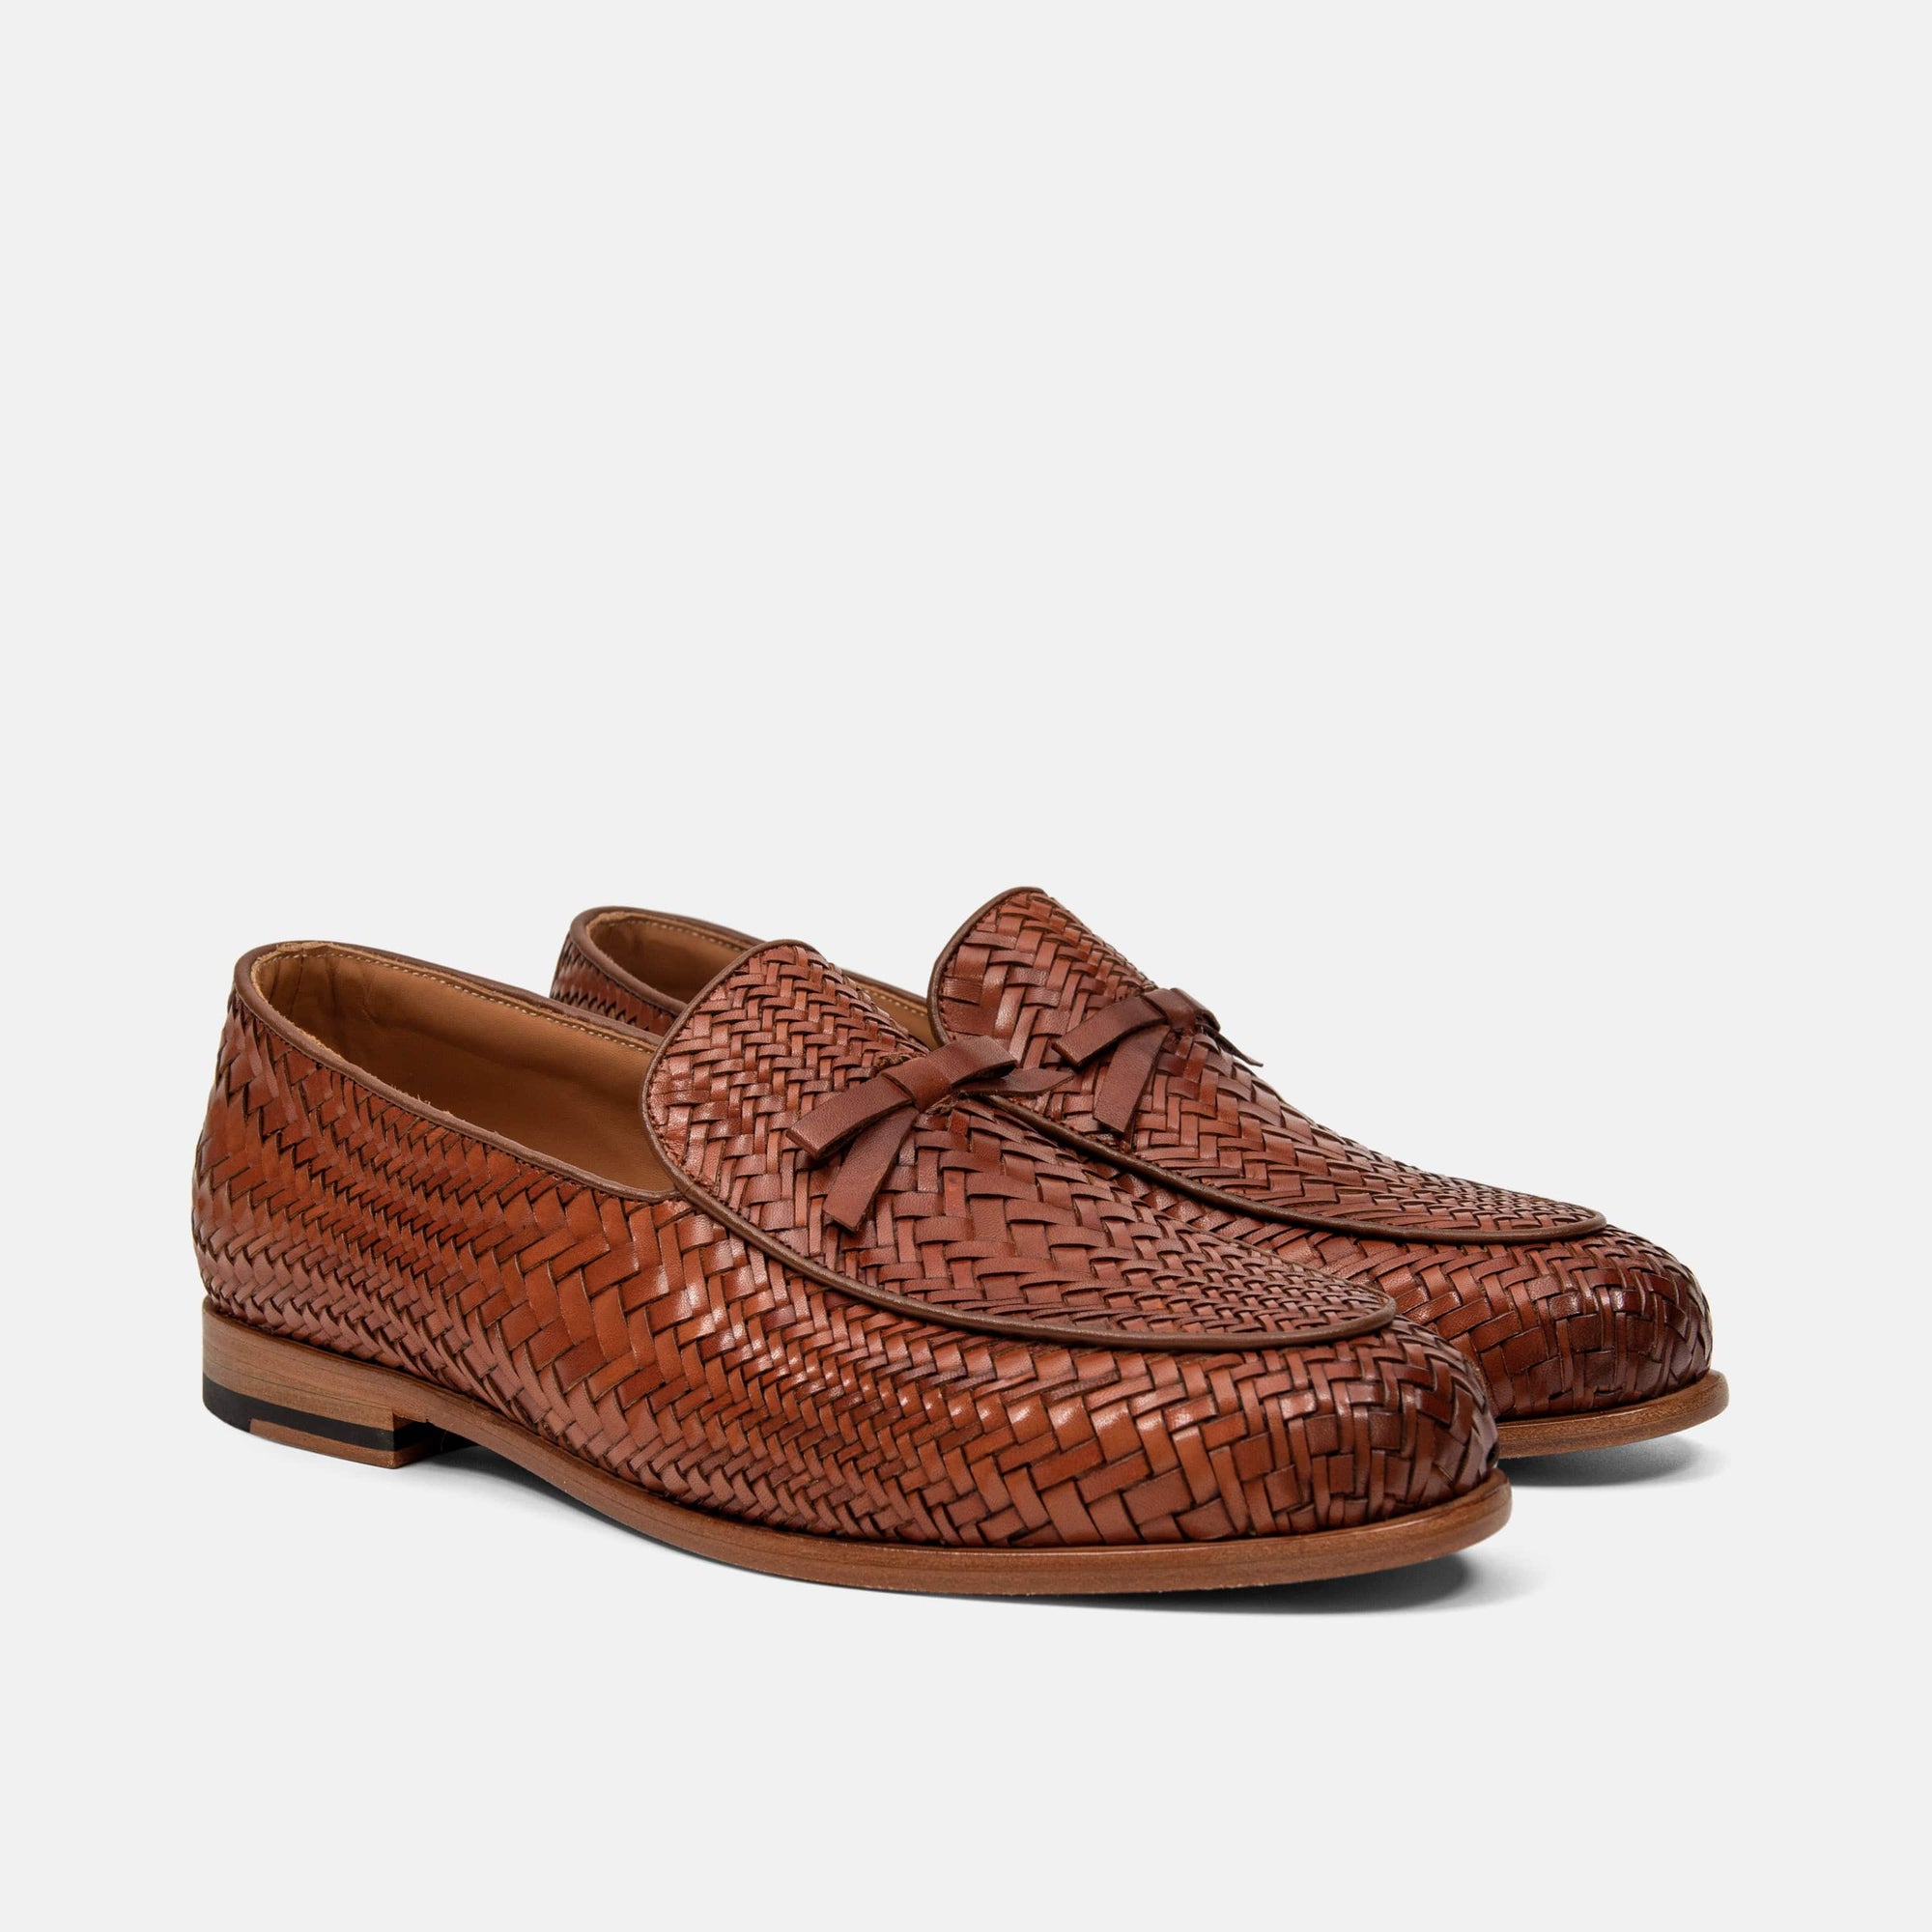 Odell Caramel Woven Leather Belgian Loafers